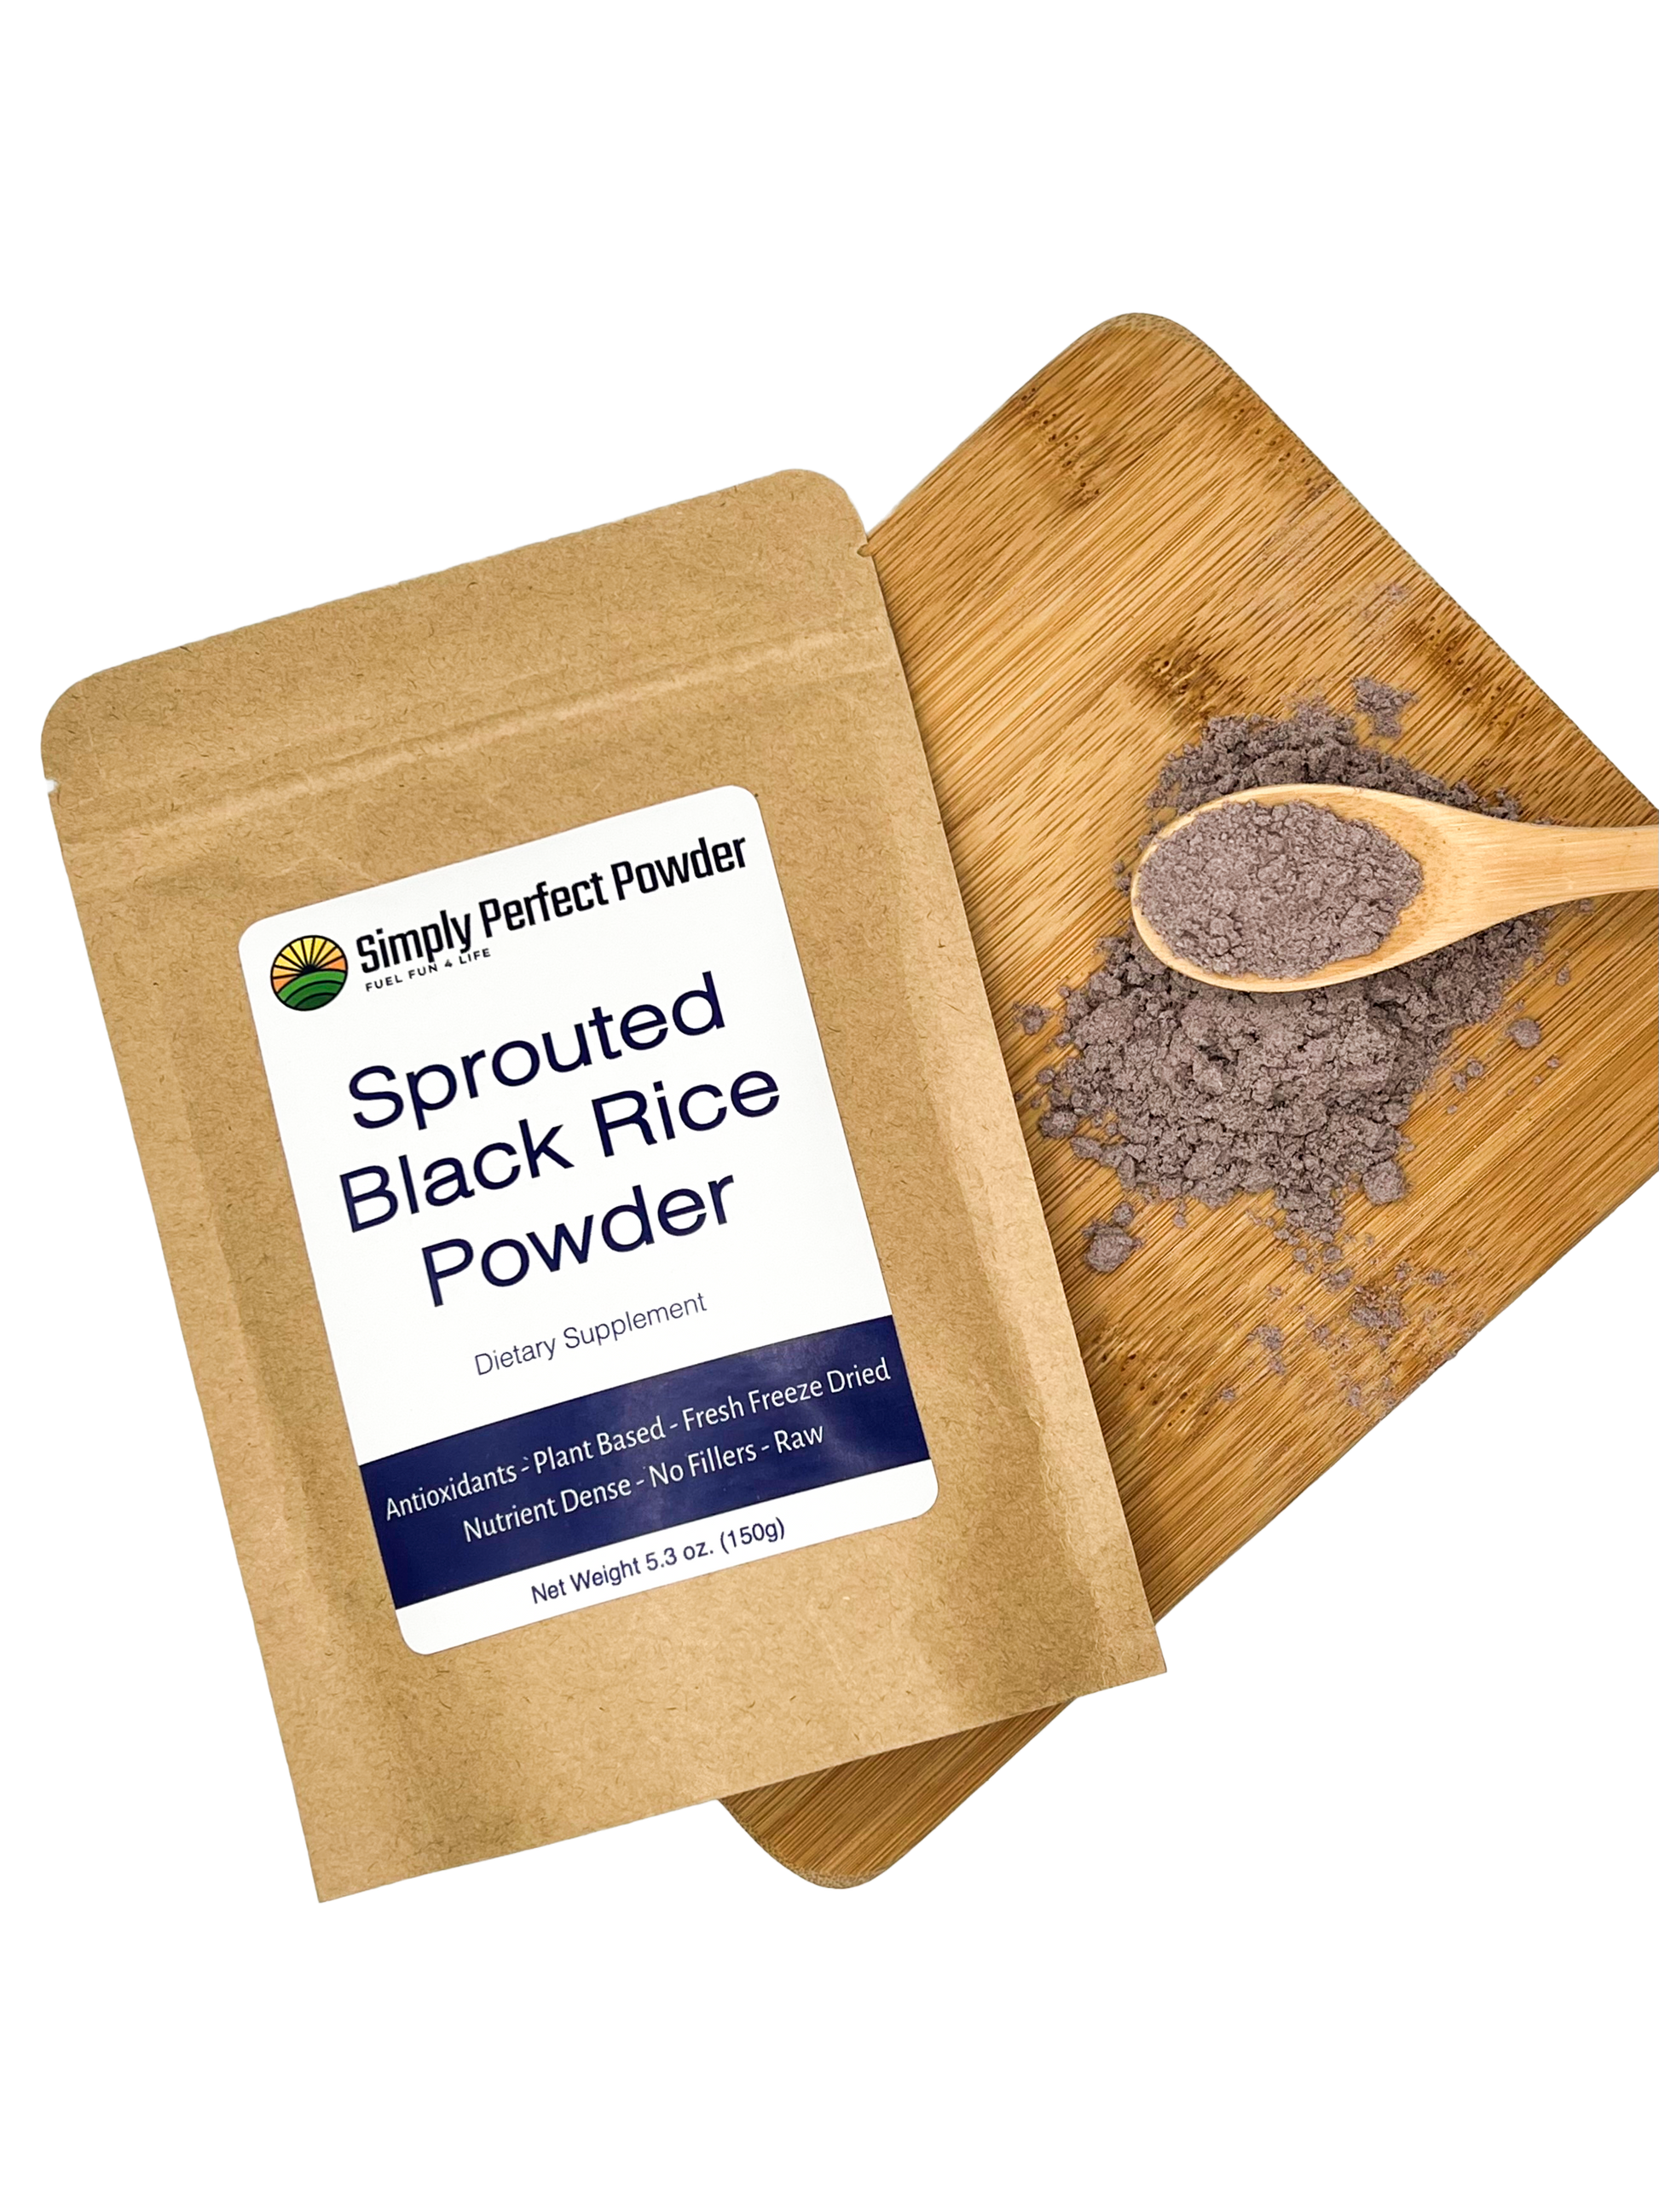 Simply Perfect Powder, black rice, black rice powder, sprouted black rice powder, antioxidant, anthocyanins, high in antioxidants, nutrient dense, high in protein, high in fiber, supplement, nutritional supplement, whole food, nutrient dense whole food, healthy diet, healthy lifestyle, lower cholesterol, lower blood pressure, heart health, improve heart health